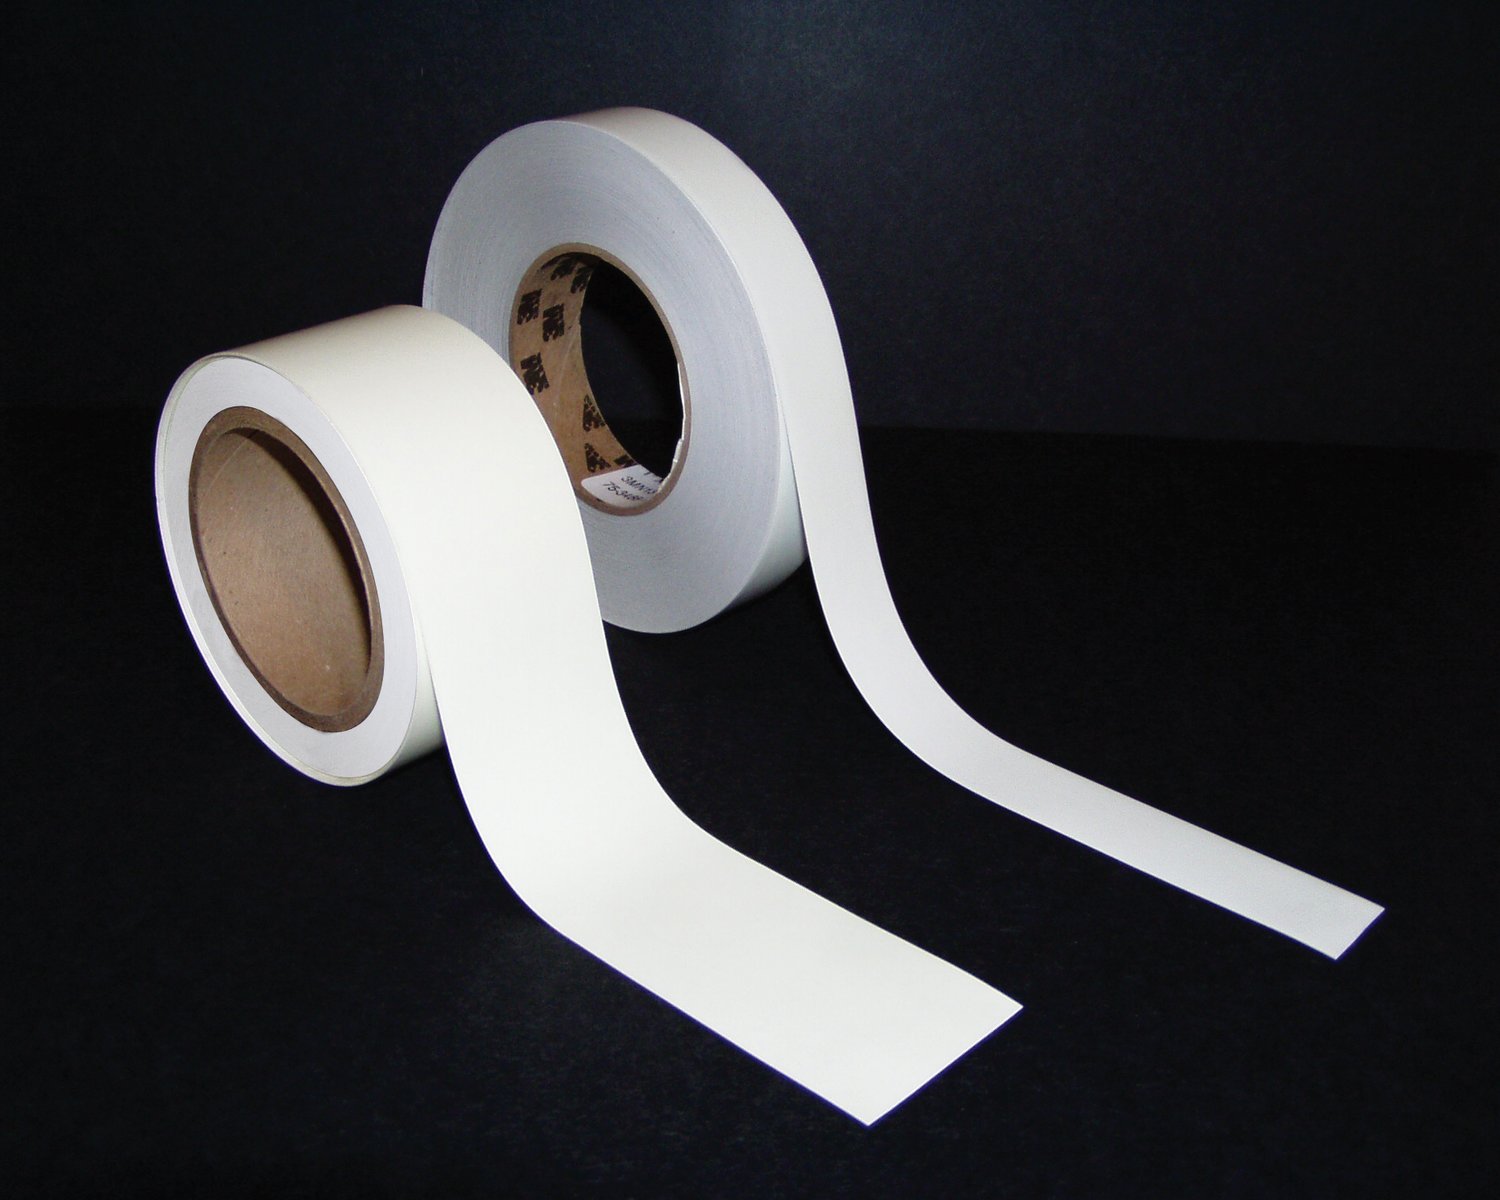  Double Sided Tape 12M Double Sided Tape White Super Strong Double  Sided Adhesive Tape Paper Strong Ultra Thin High Adhesive Cotton 8mm 10mm  12mm (Size : 12M, Color : 1cm) 